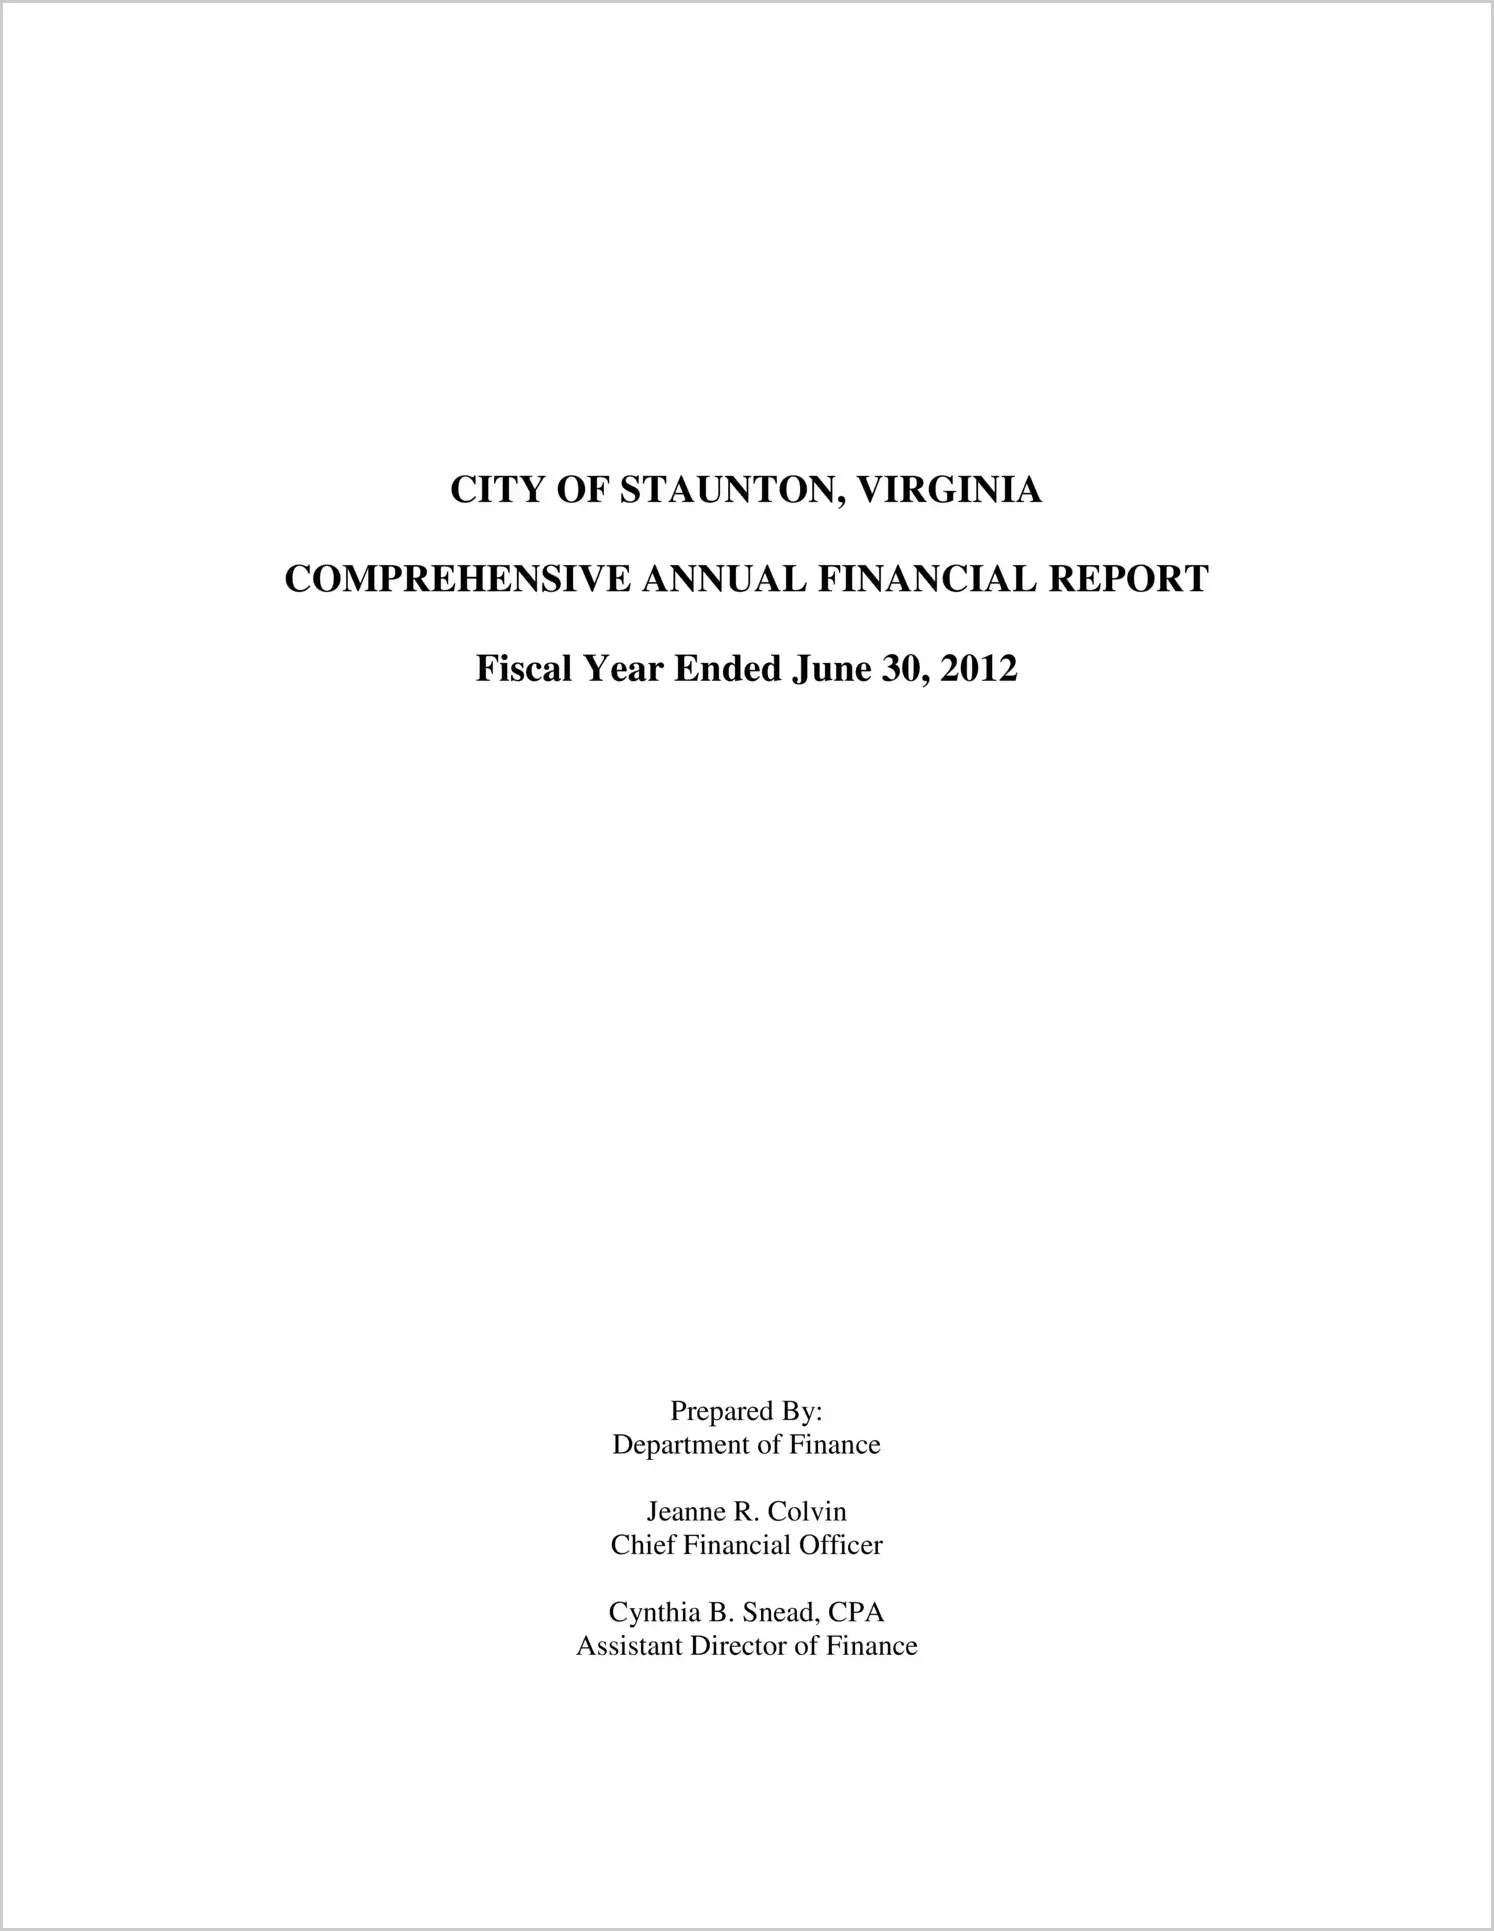 2012 Annual Financial Report for City of Staunton